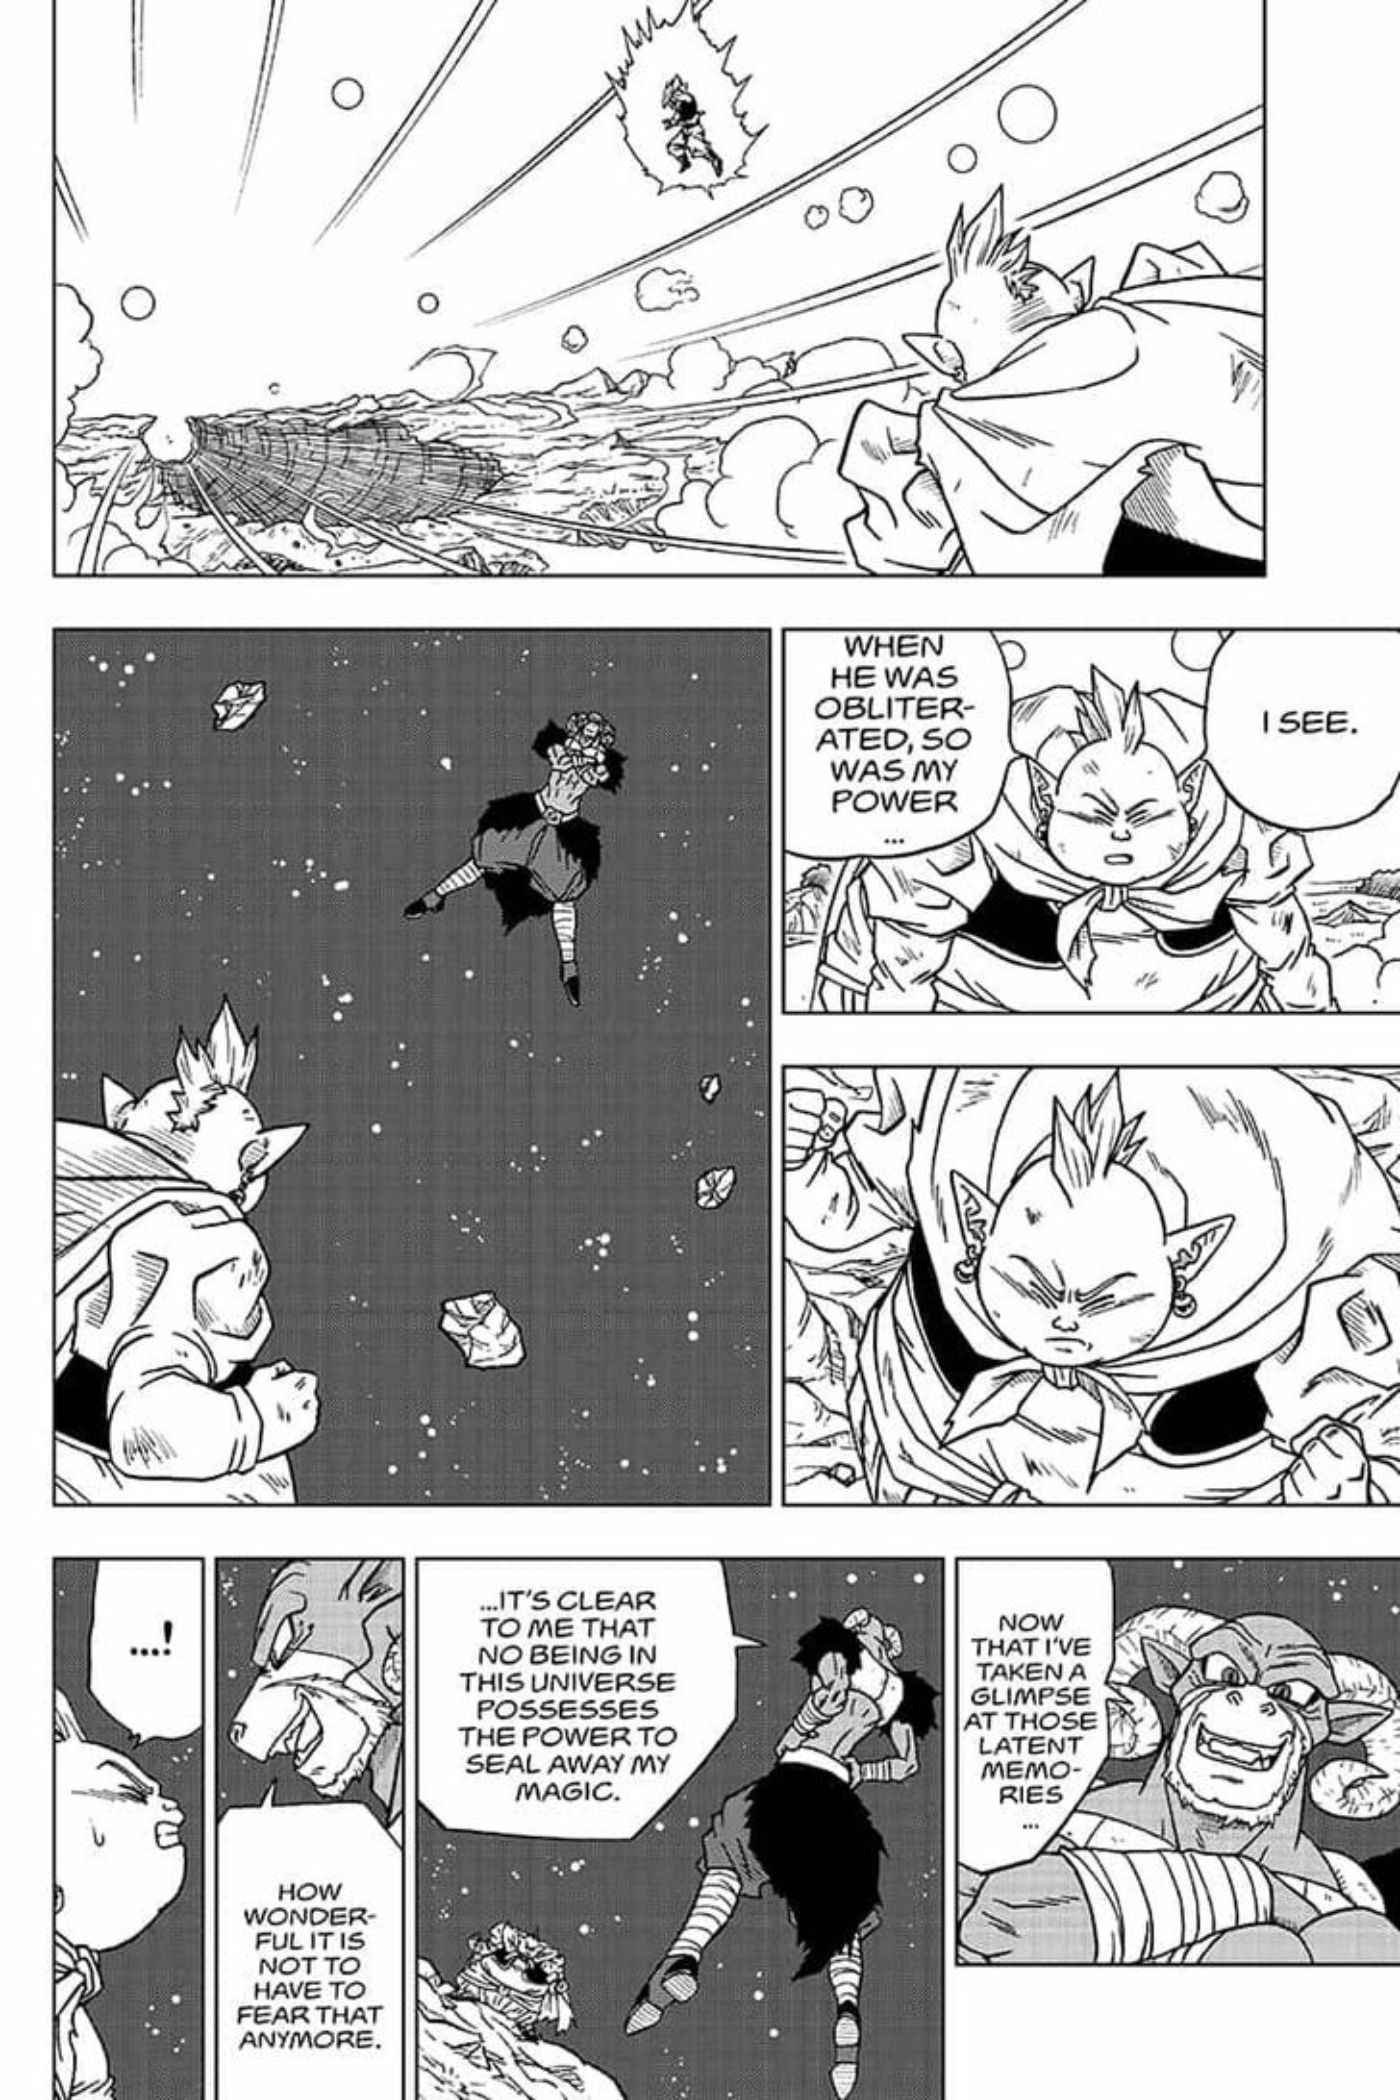 Goku’s Greatest Dragon Ball Victory Nearly Destroyed The Universe